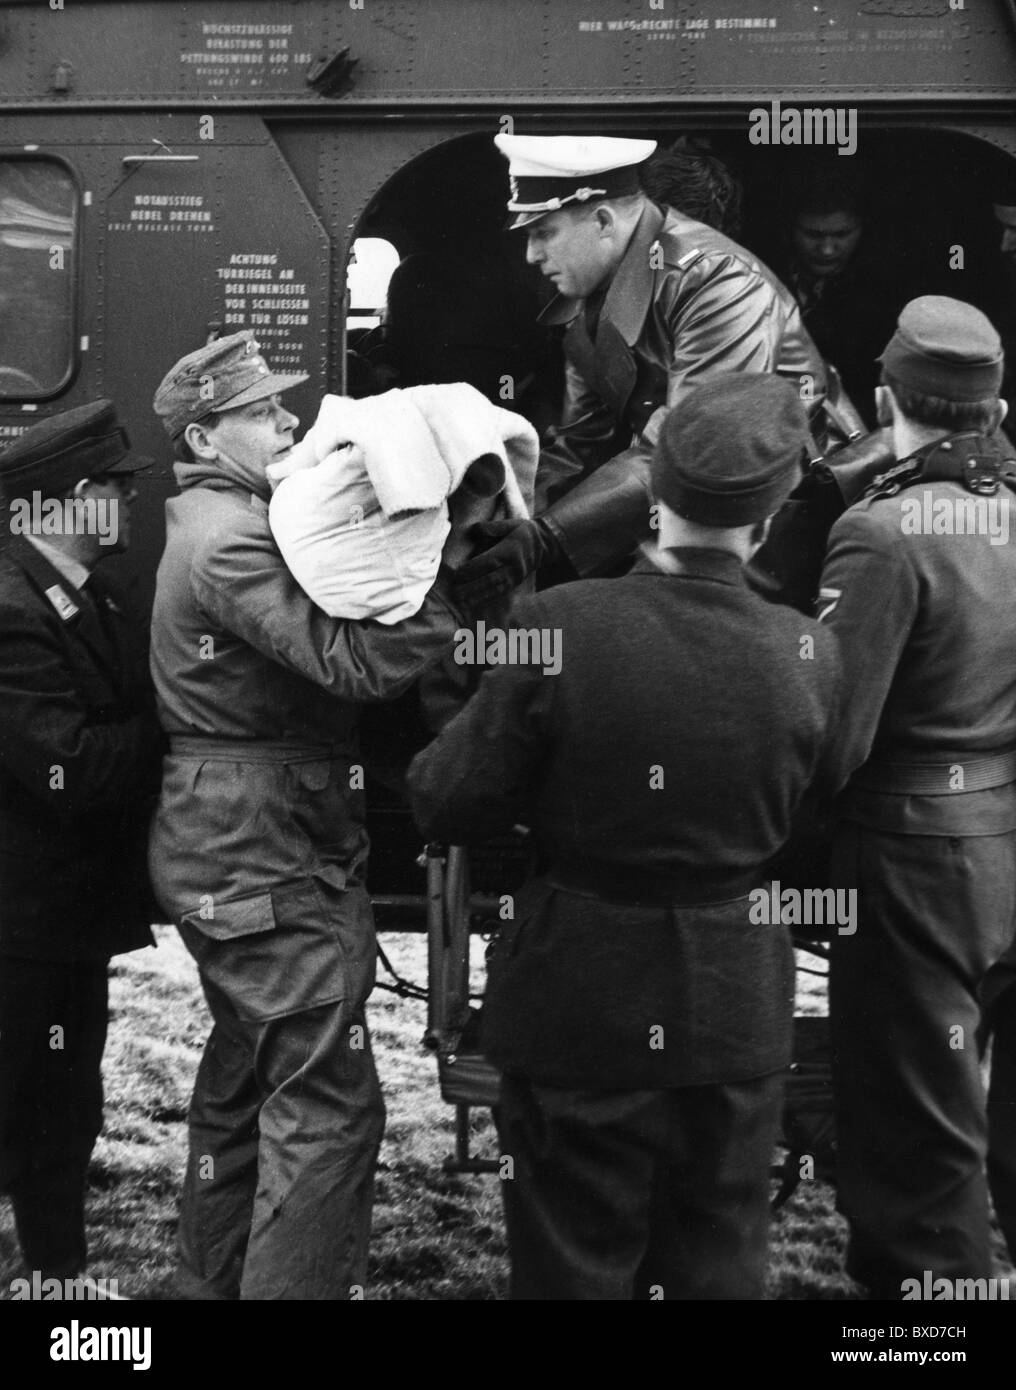 disasters, floods, North Sea flood, 16./17.2.1962, West Germany, Hamburg, unloading a helicopter, 17.2.1962,  military, police, bundeswehr, soldiers, natural catastrophe, destruction, historic, historical, 20th century, 1960s, people, Additional-Rights-Clearences-Not Available Stock Photo